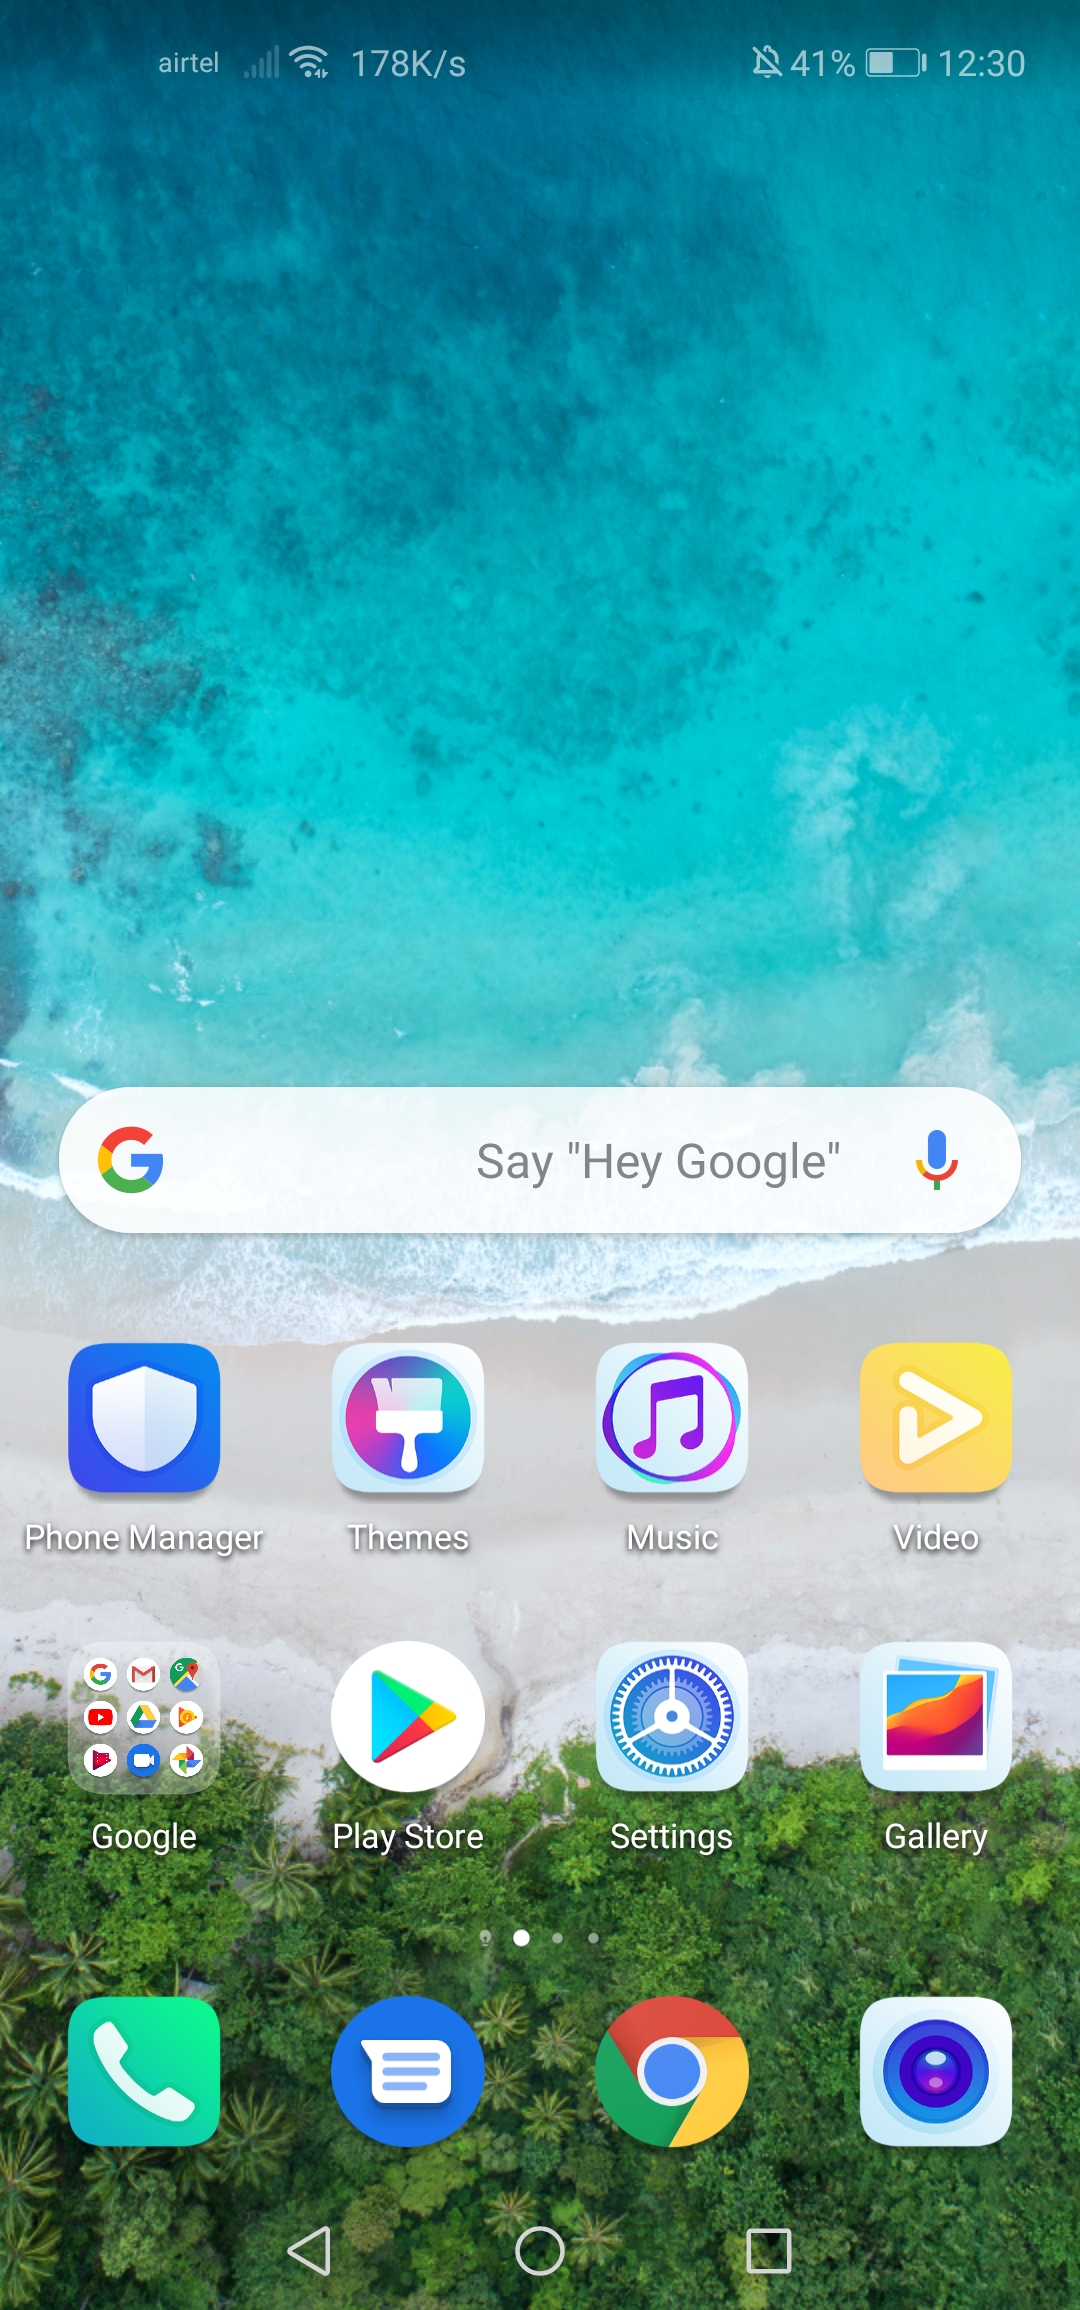 Interactive-Post-Share-Screenshot-of-Your-Home-Screen